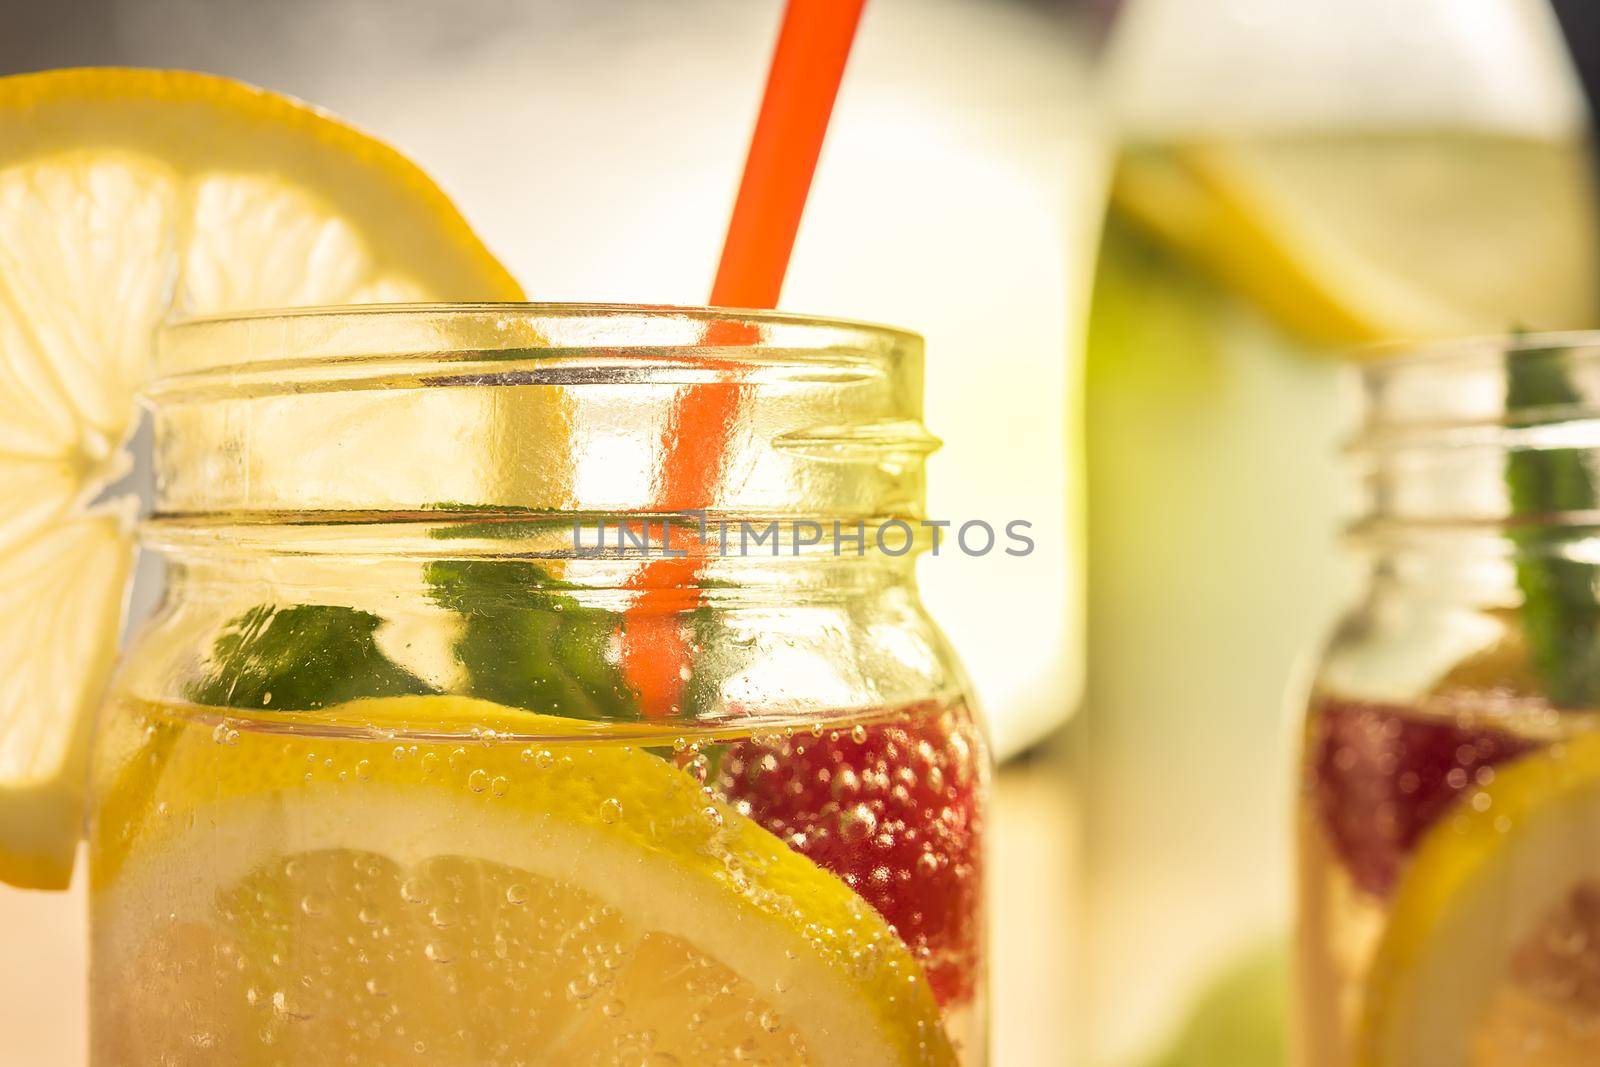 close-up of a glass jar lit by sunlight with refreshing cold lemonade water, lemon slices, red berries, mint leaves and drink cane. Summer citrus soda background